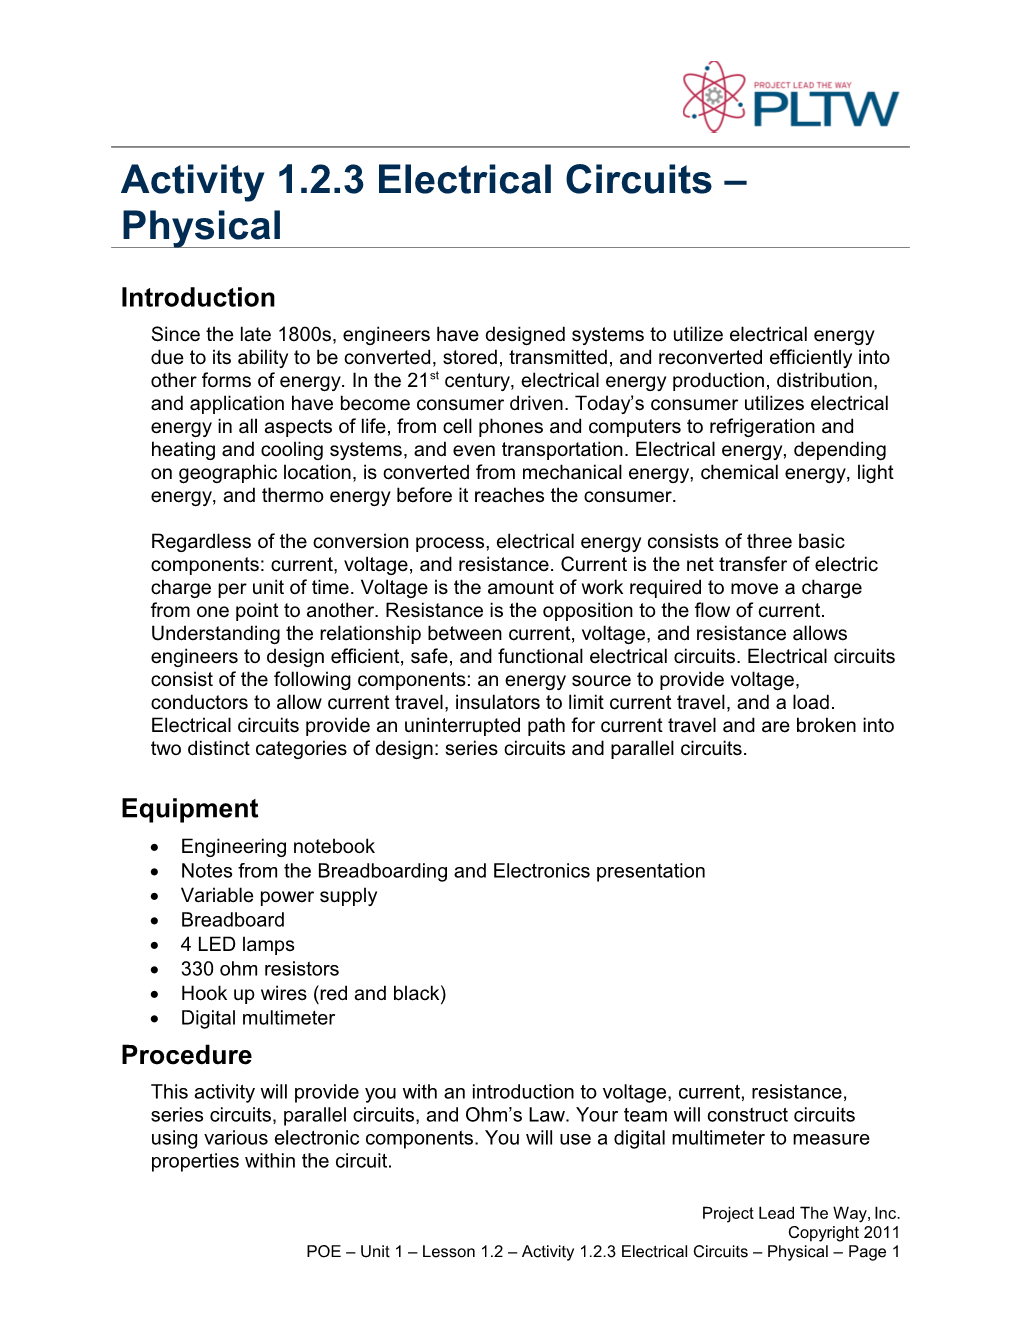 Activity 1.2.3 Electrical Circuits Physical